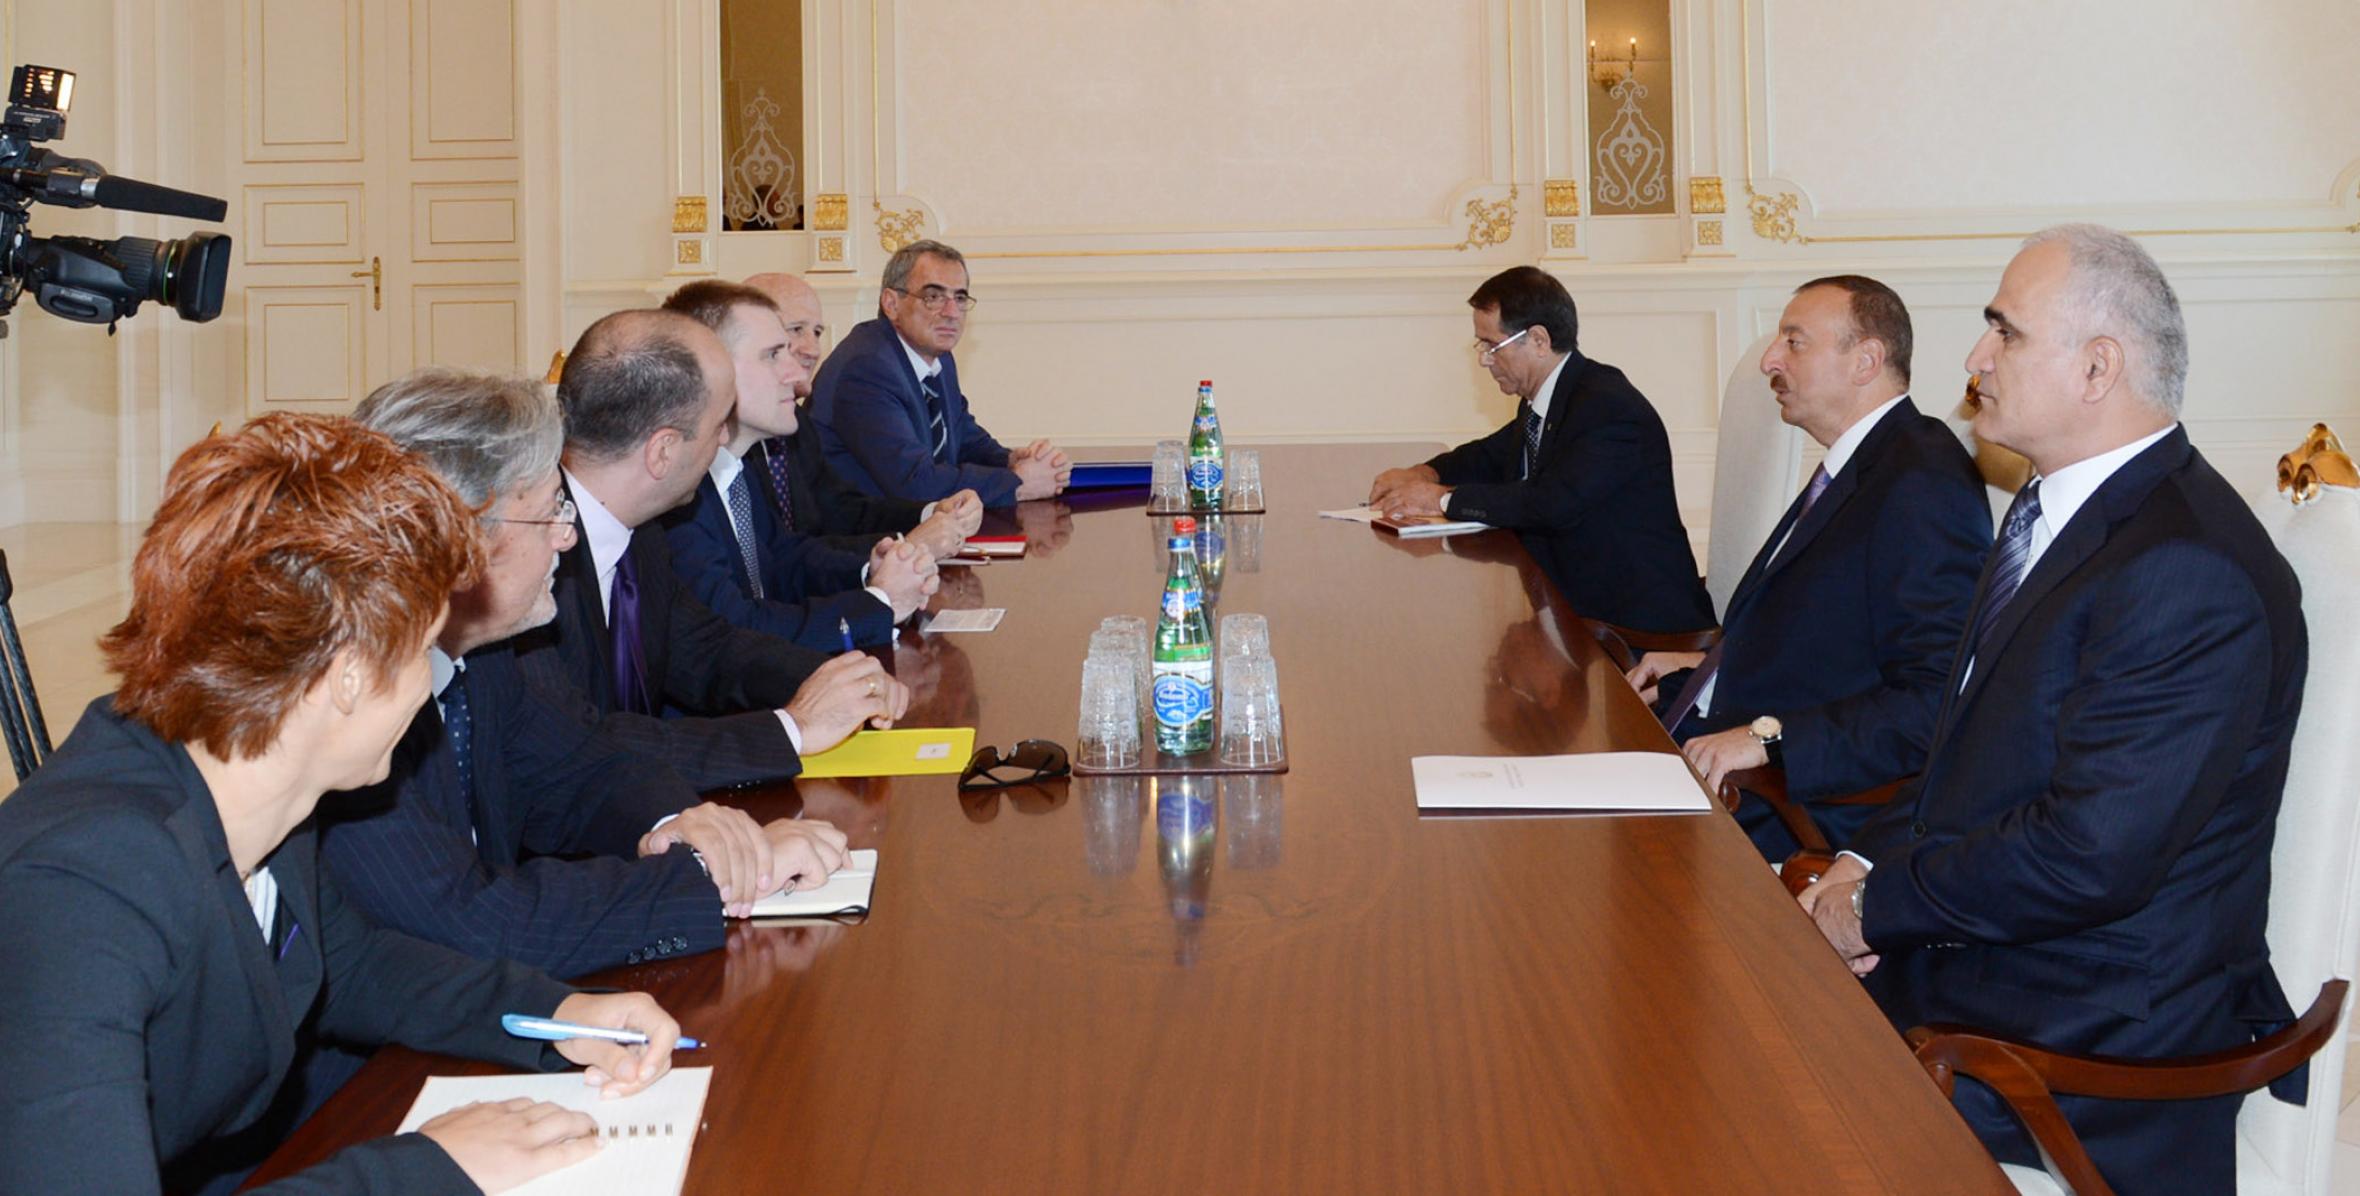 Ilham Aliyev received a delegation led by the Prime Minister of Montenegro